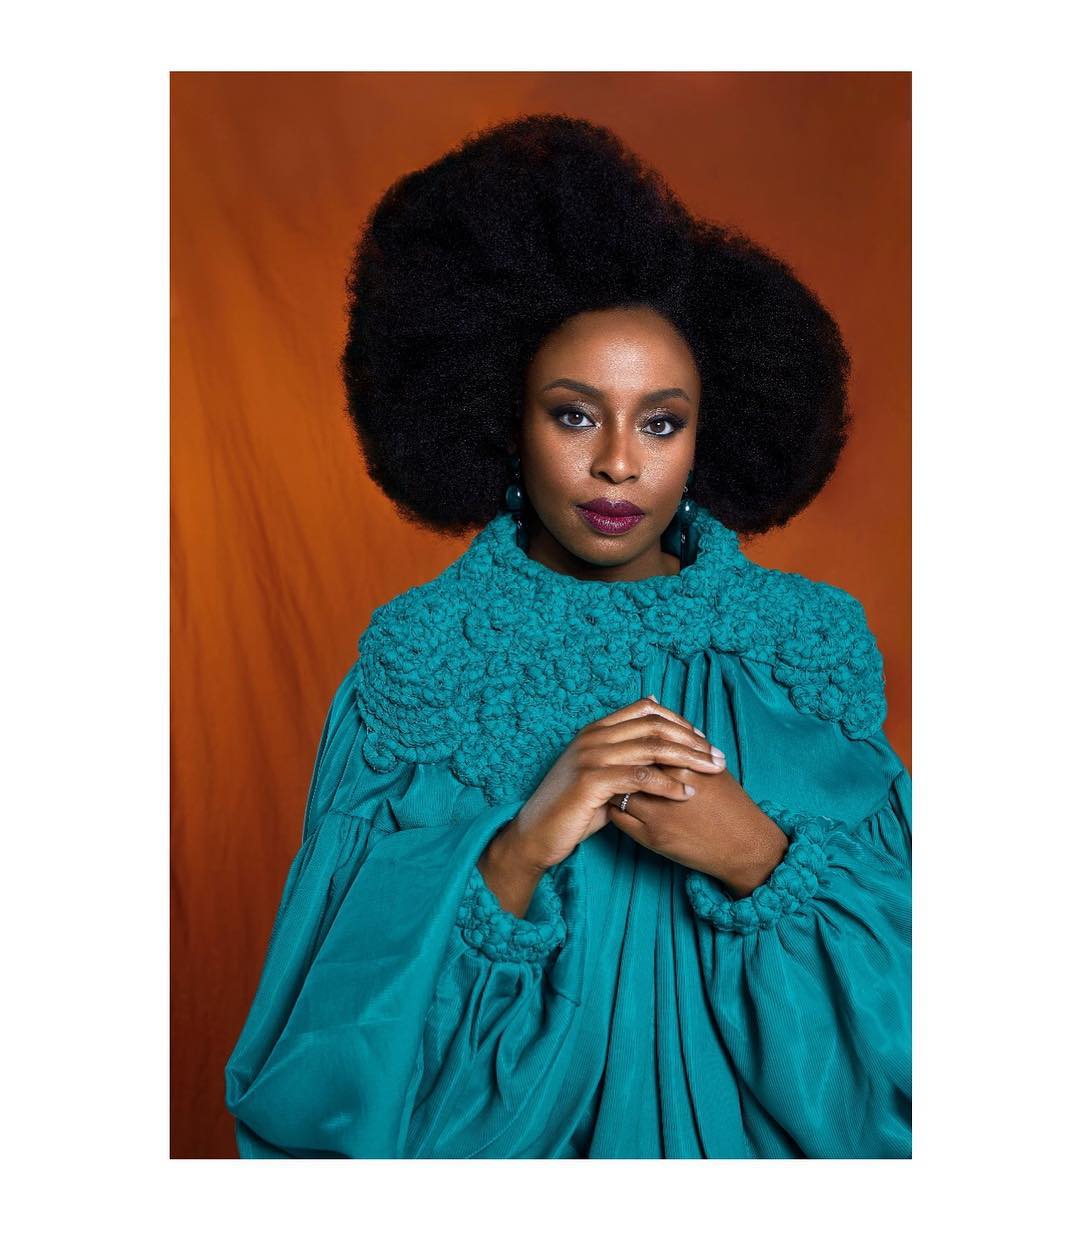 Chimamanda Ngozi Adichie on the cover of Marie Claire Brazil